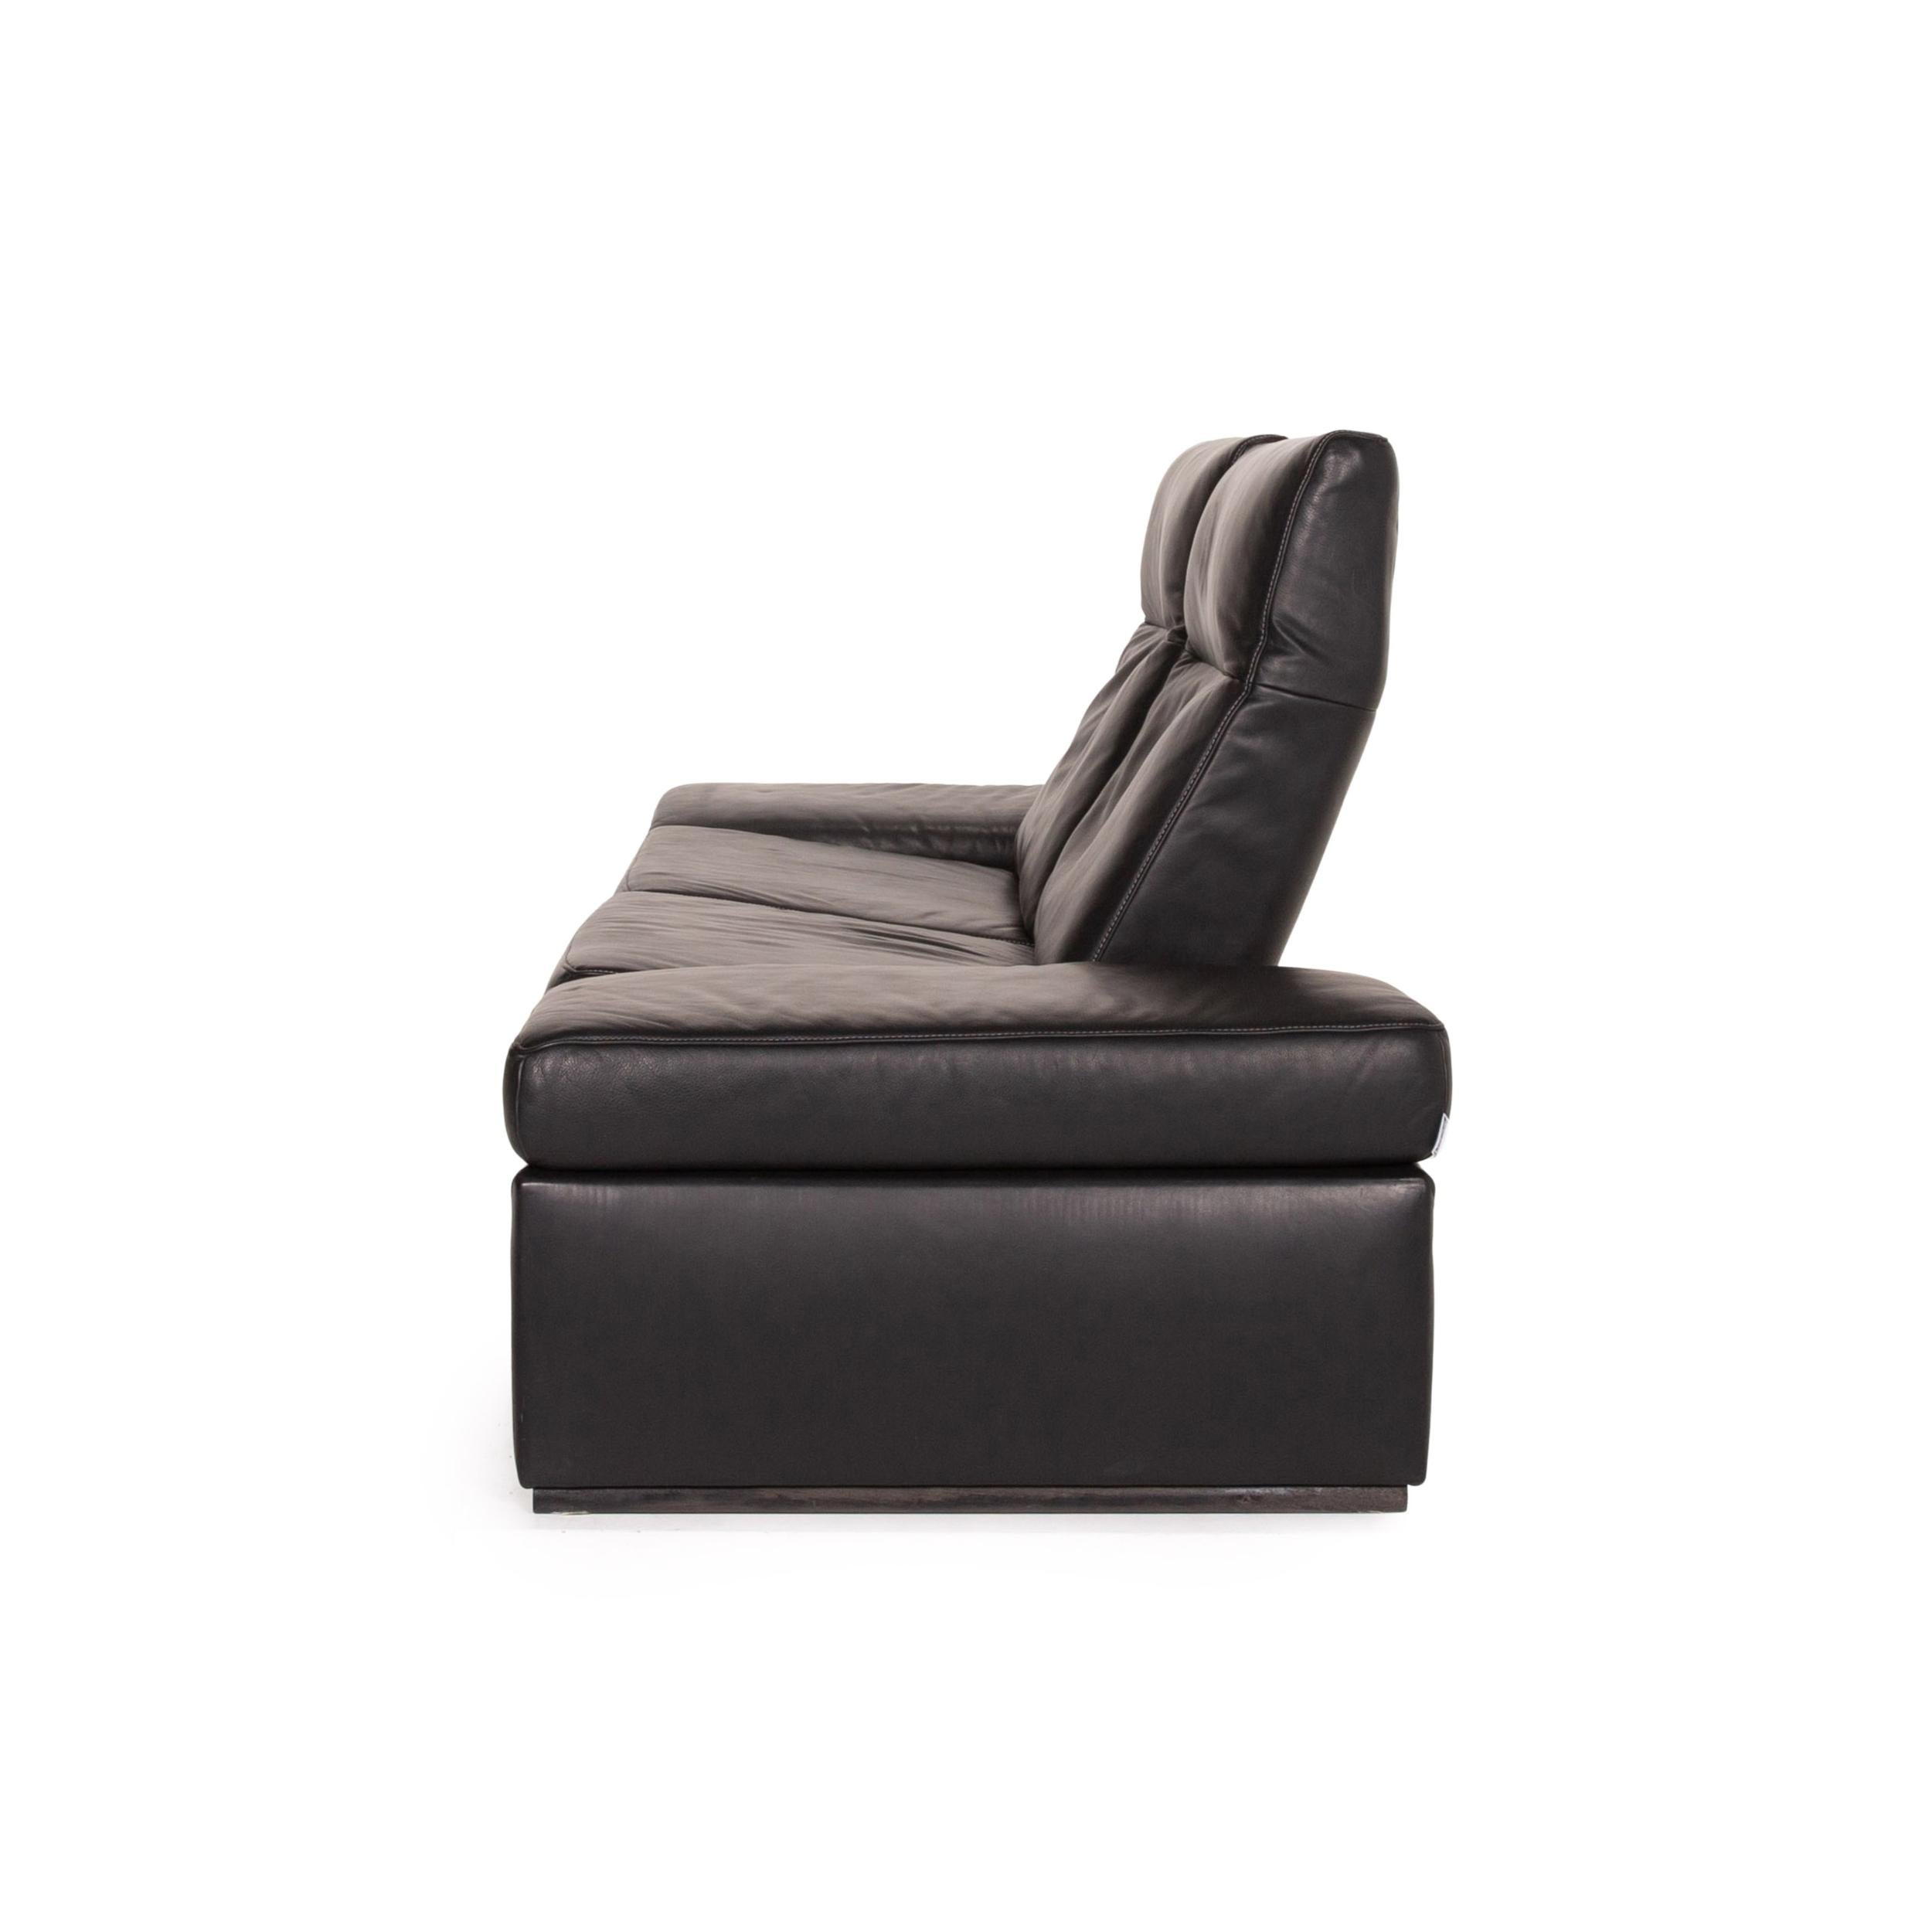 Mondo Leather Sofa Black Three-Seat Electrical Function Relaxation Function 7